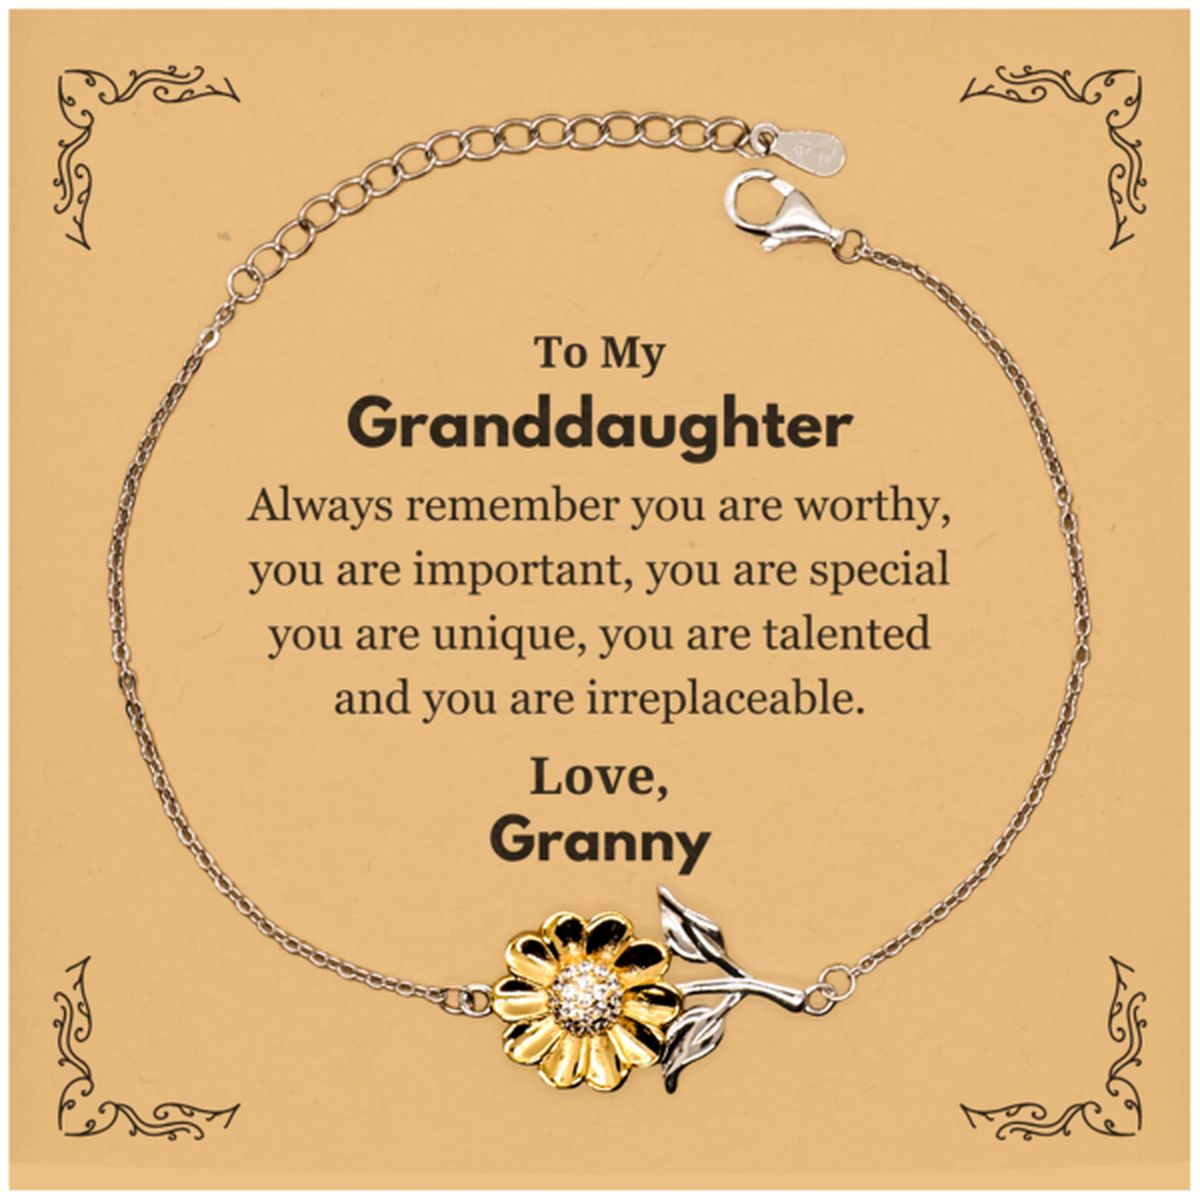 Granddaughter Birthday Gifts from Granny, Inspirational Sunflower Bracelet for Granddaughter Christmas Graduation Gifts for Granddaughter Always remember you are worthy, you are important. Love, Granny